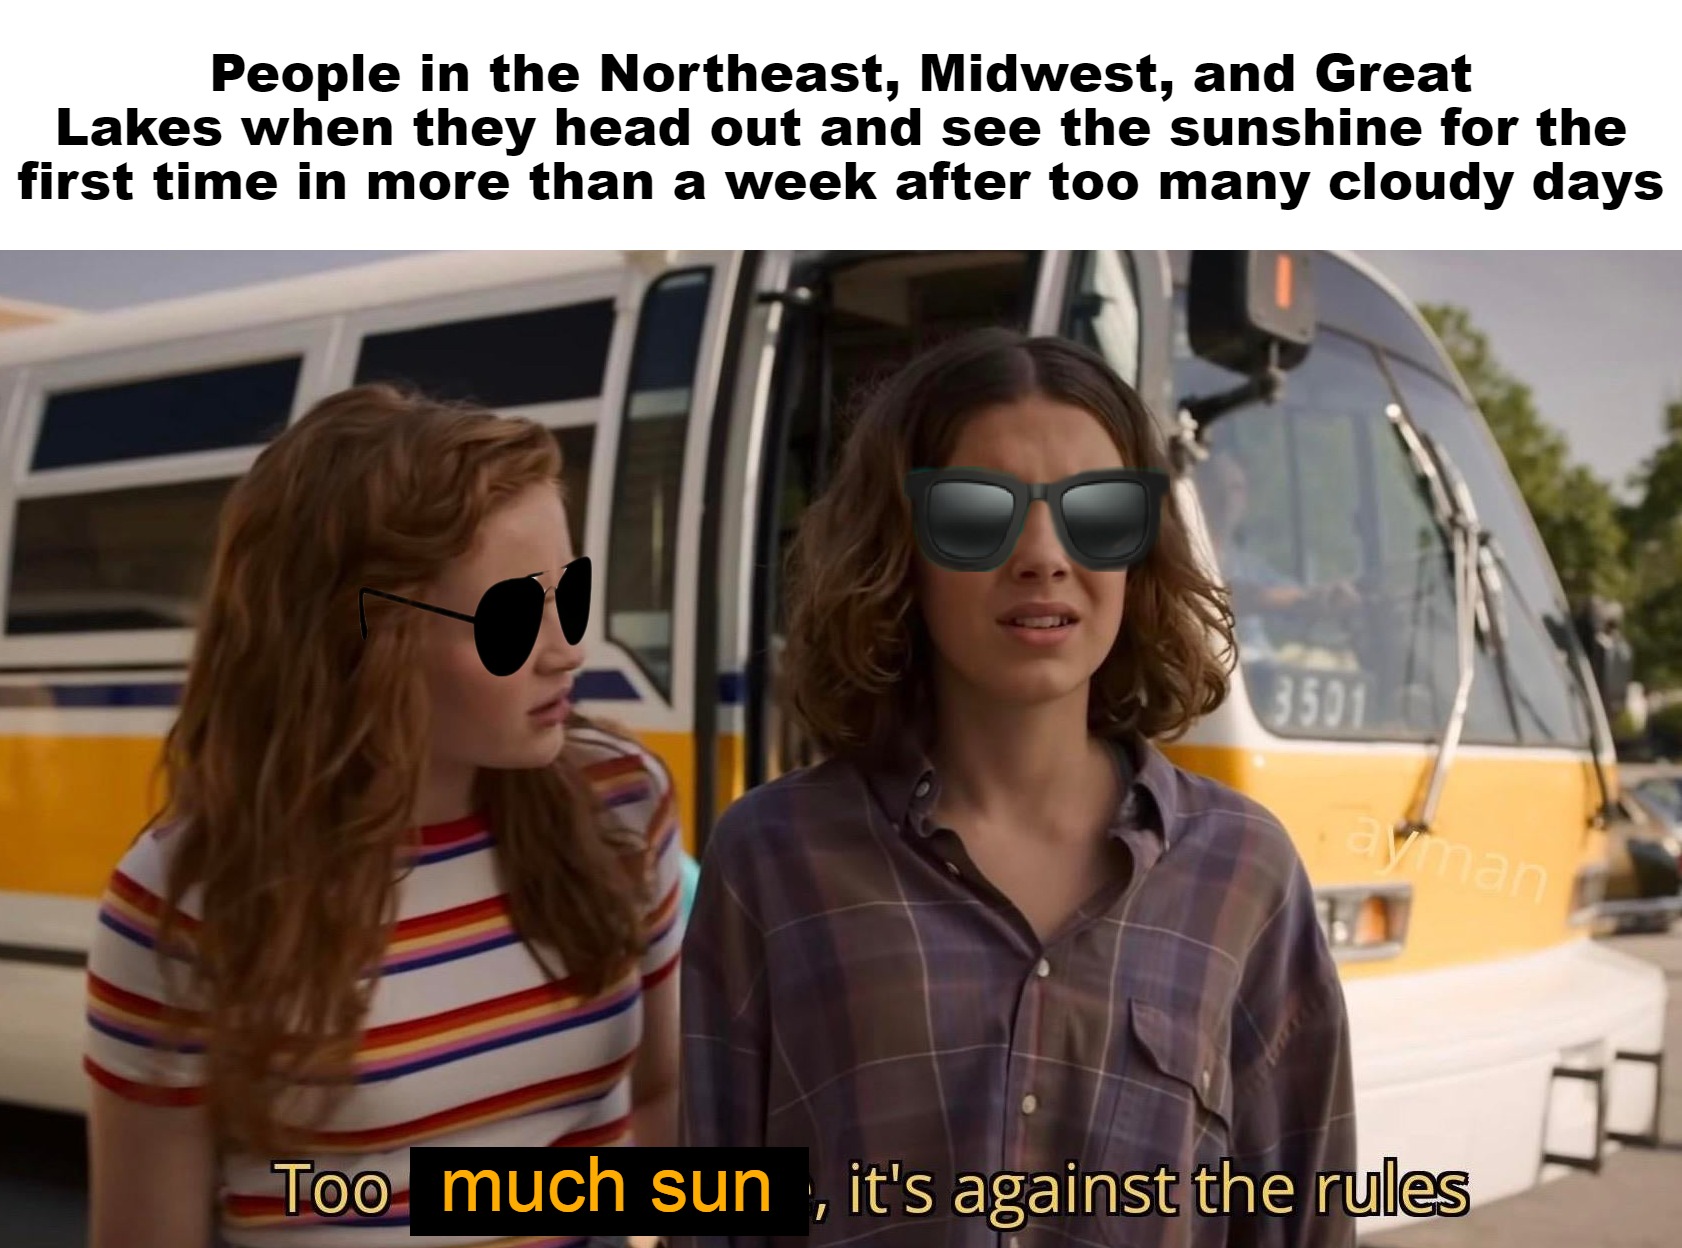 People in the Northeast, Midwest, and Great Lakes when they head out and see the sunshine for the first time in more than a week after too many cloudy days; much sun | image tagged in meme,memes,relatable,sunshine | made w/ Imgflip meme maker